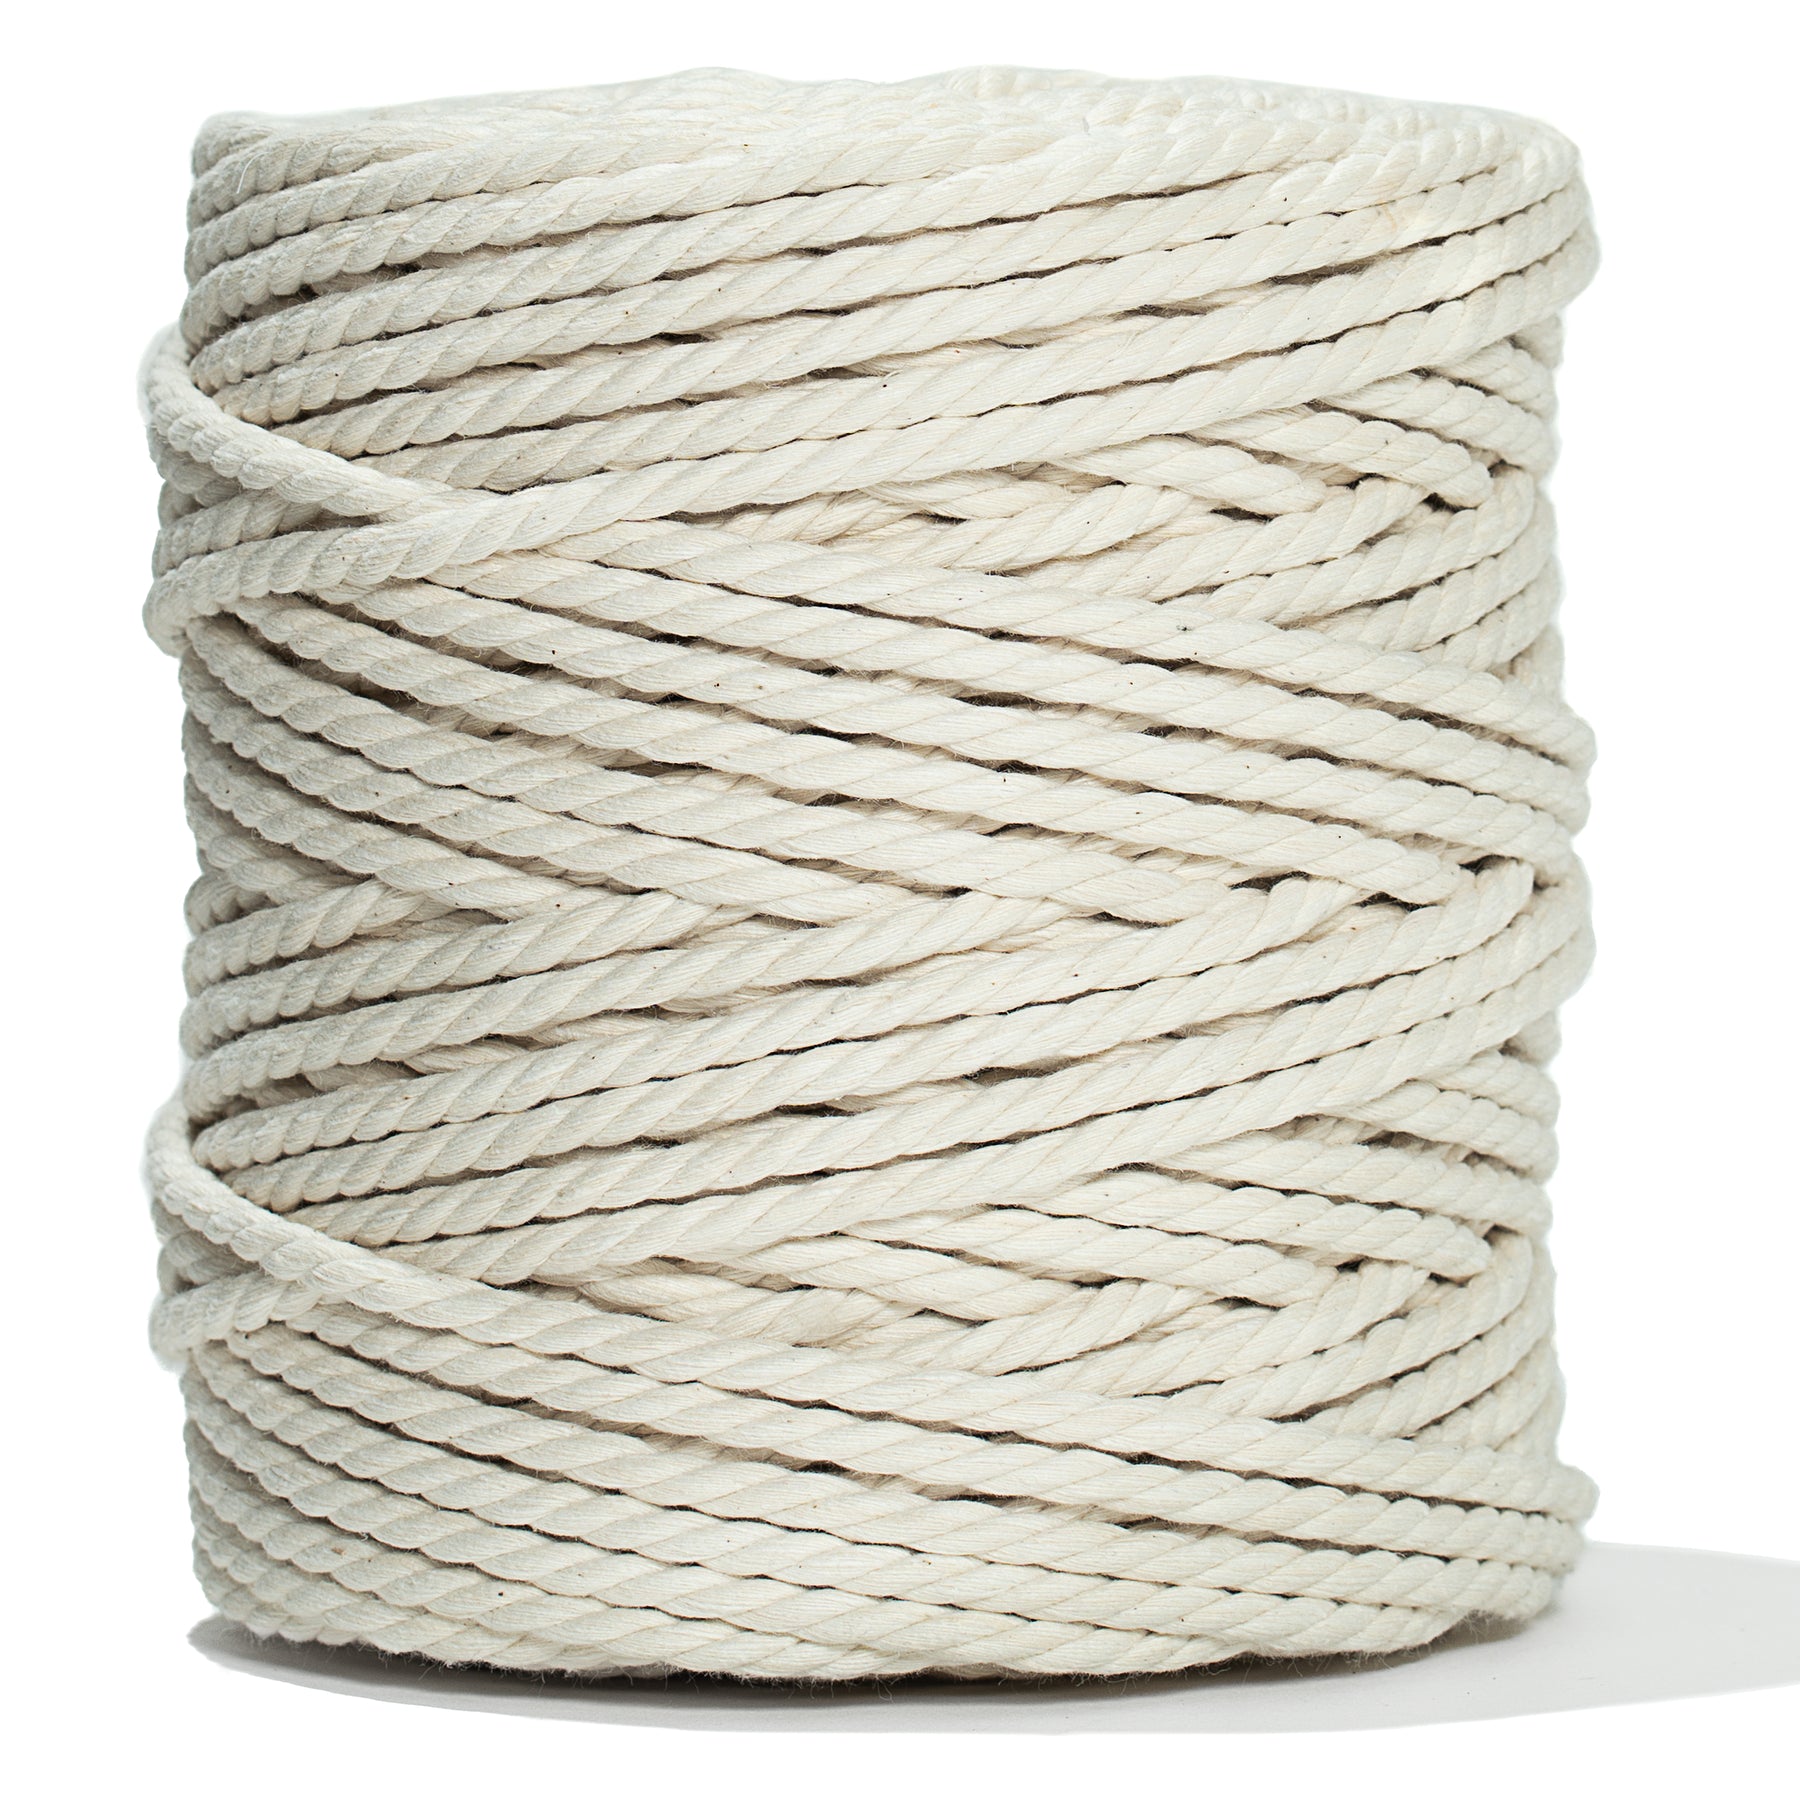 5.5 mm macrame cord 3-ply twisted 100% natural cotton rope for